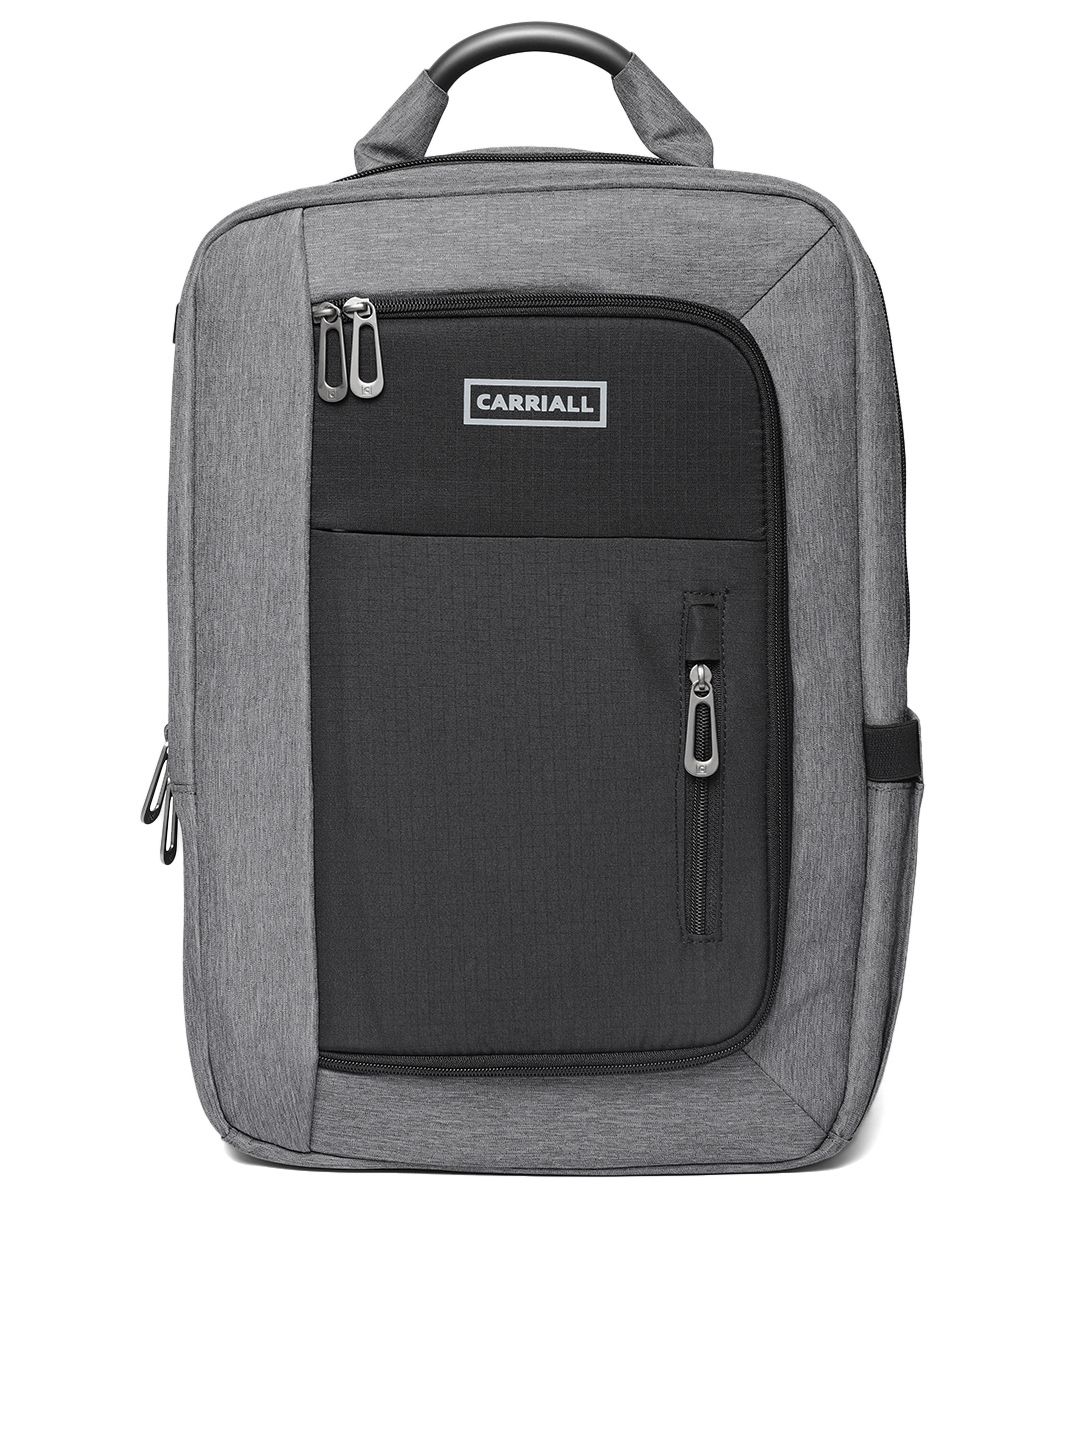 CARRIALL Unisex Grey & Black Colourblocked Minch Laptop Backpack Price in India